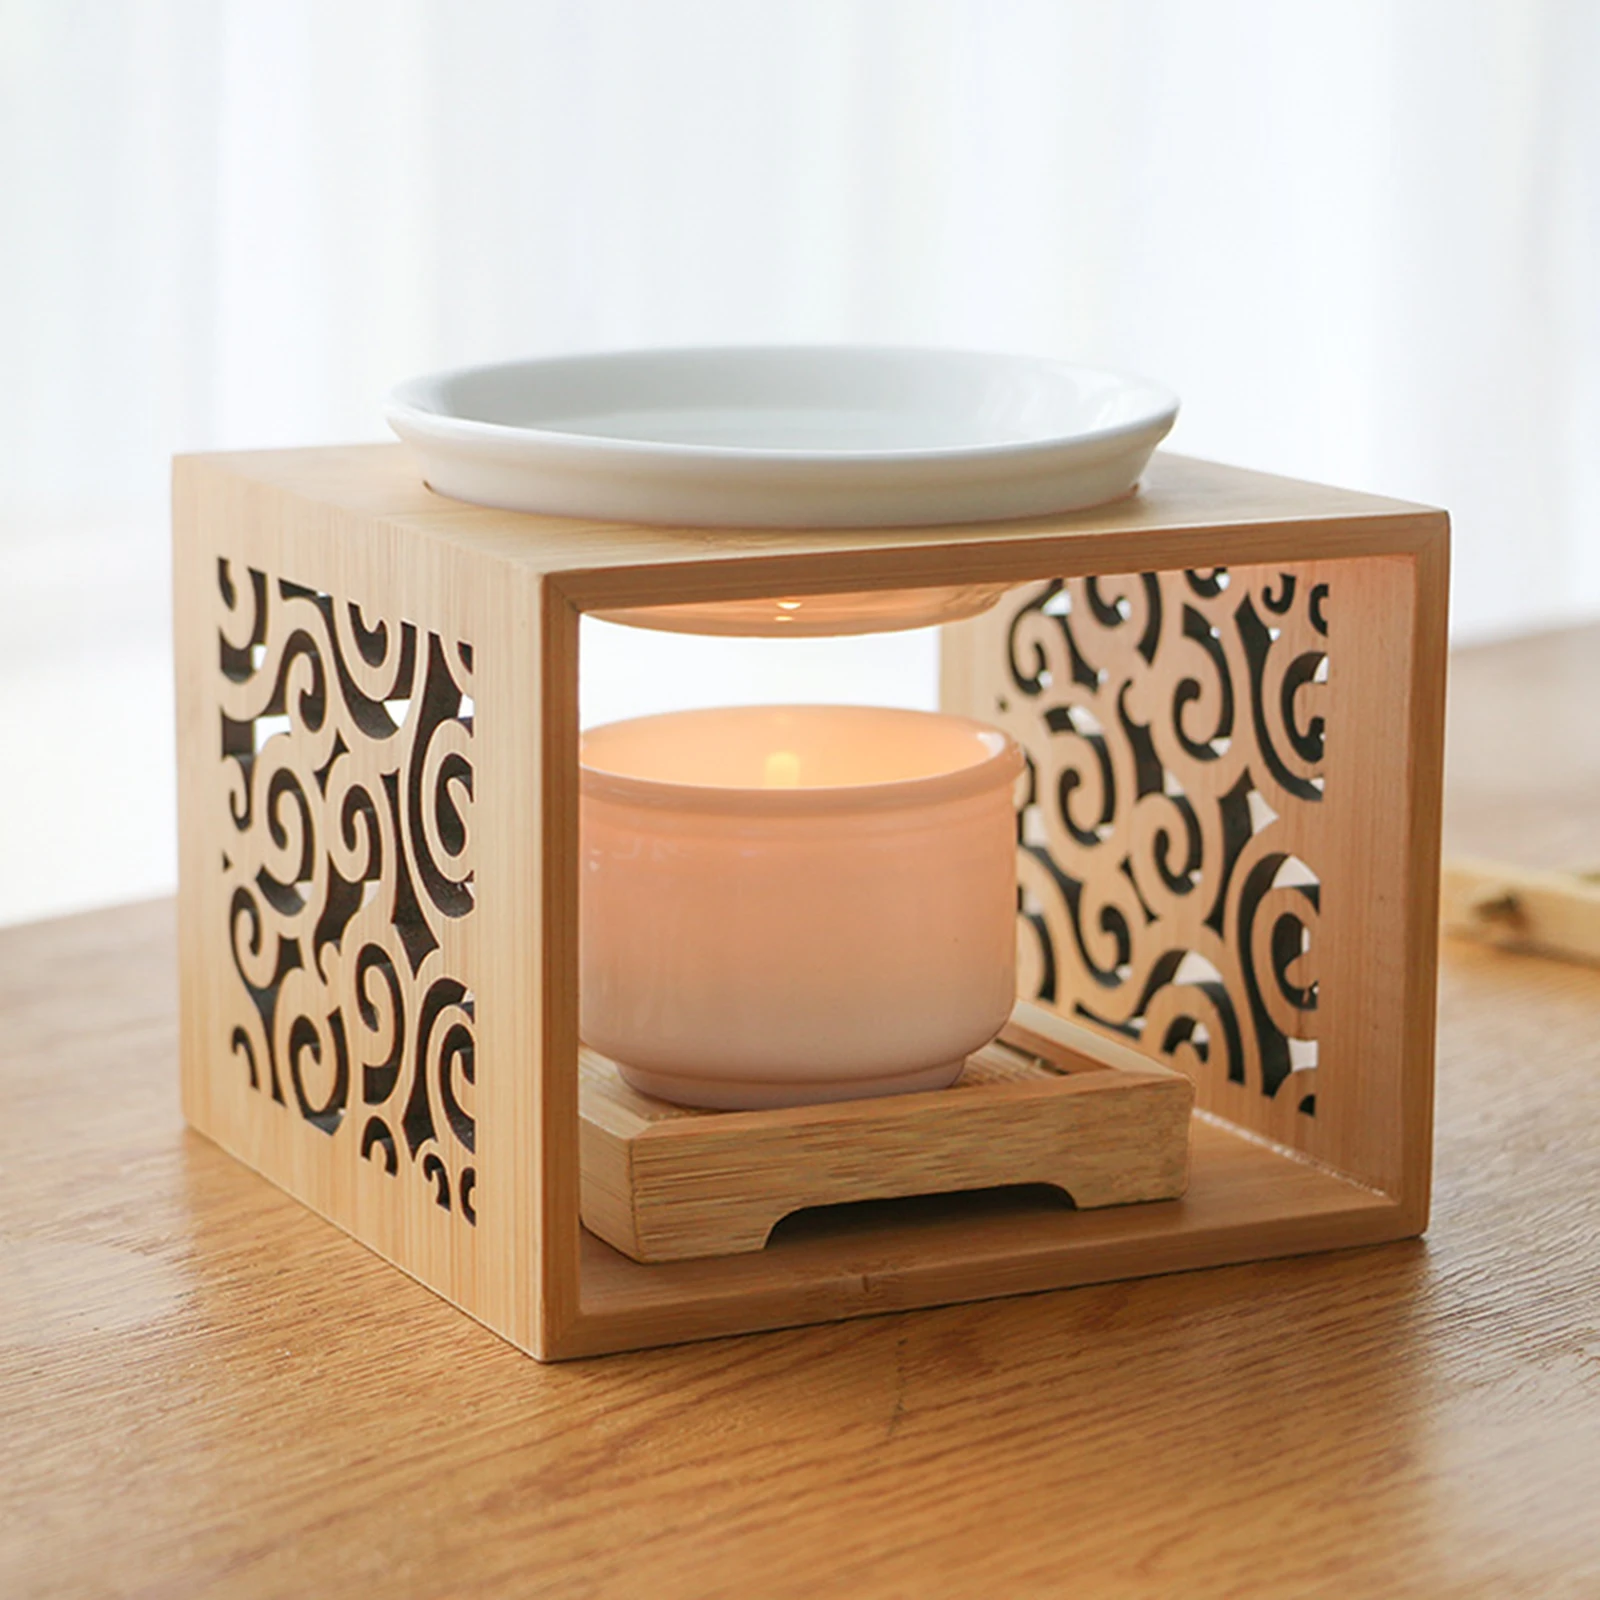 Ceramic Tealight Candle Holder Aromatherapy Oil Burner,Essential Oil Incense Aroma Diffuser Furnace Home Living Room Yoga Decor